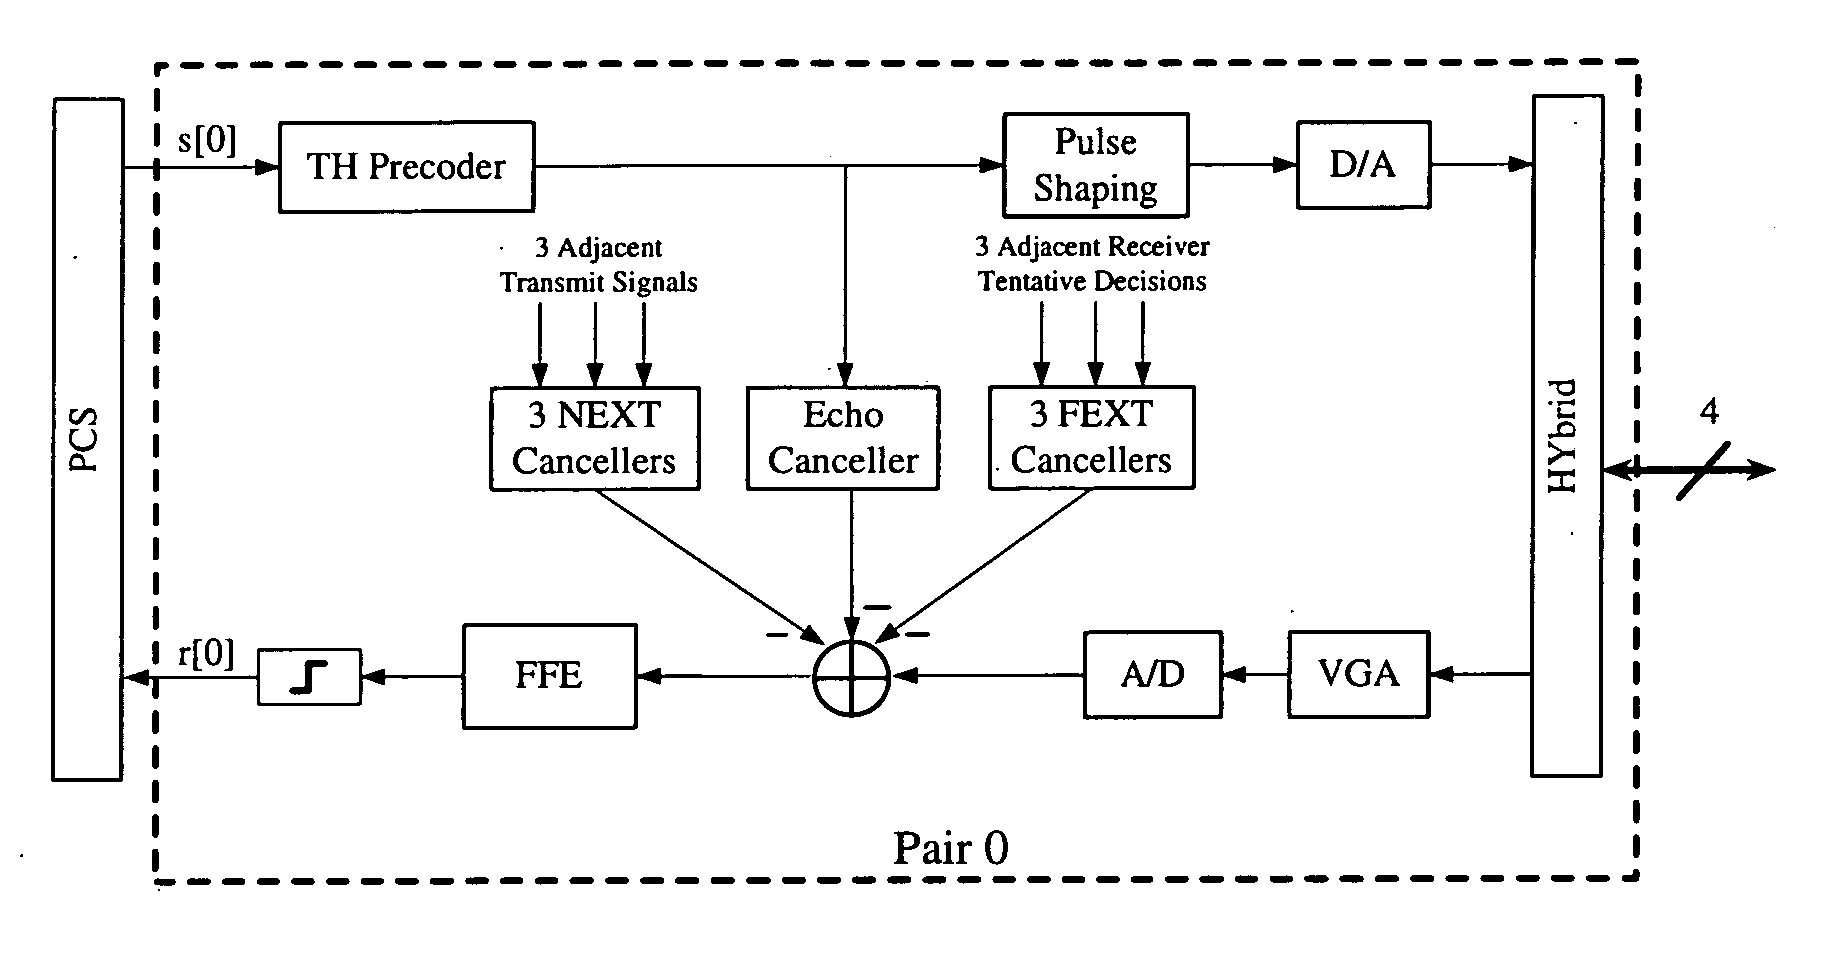 System and method for low-power echo and next cancellers